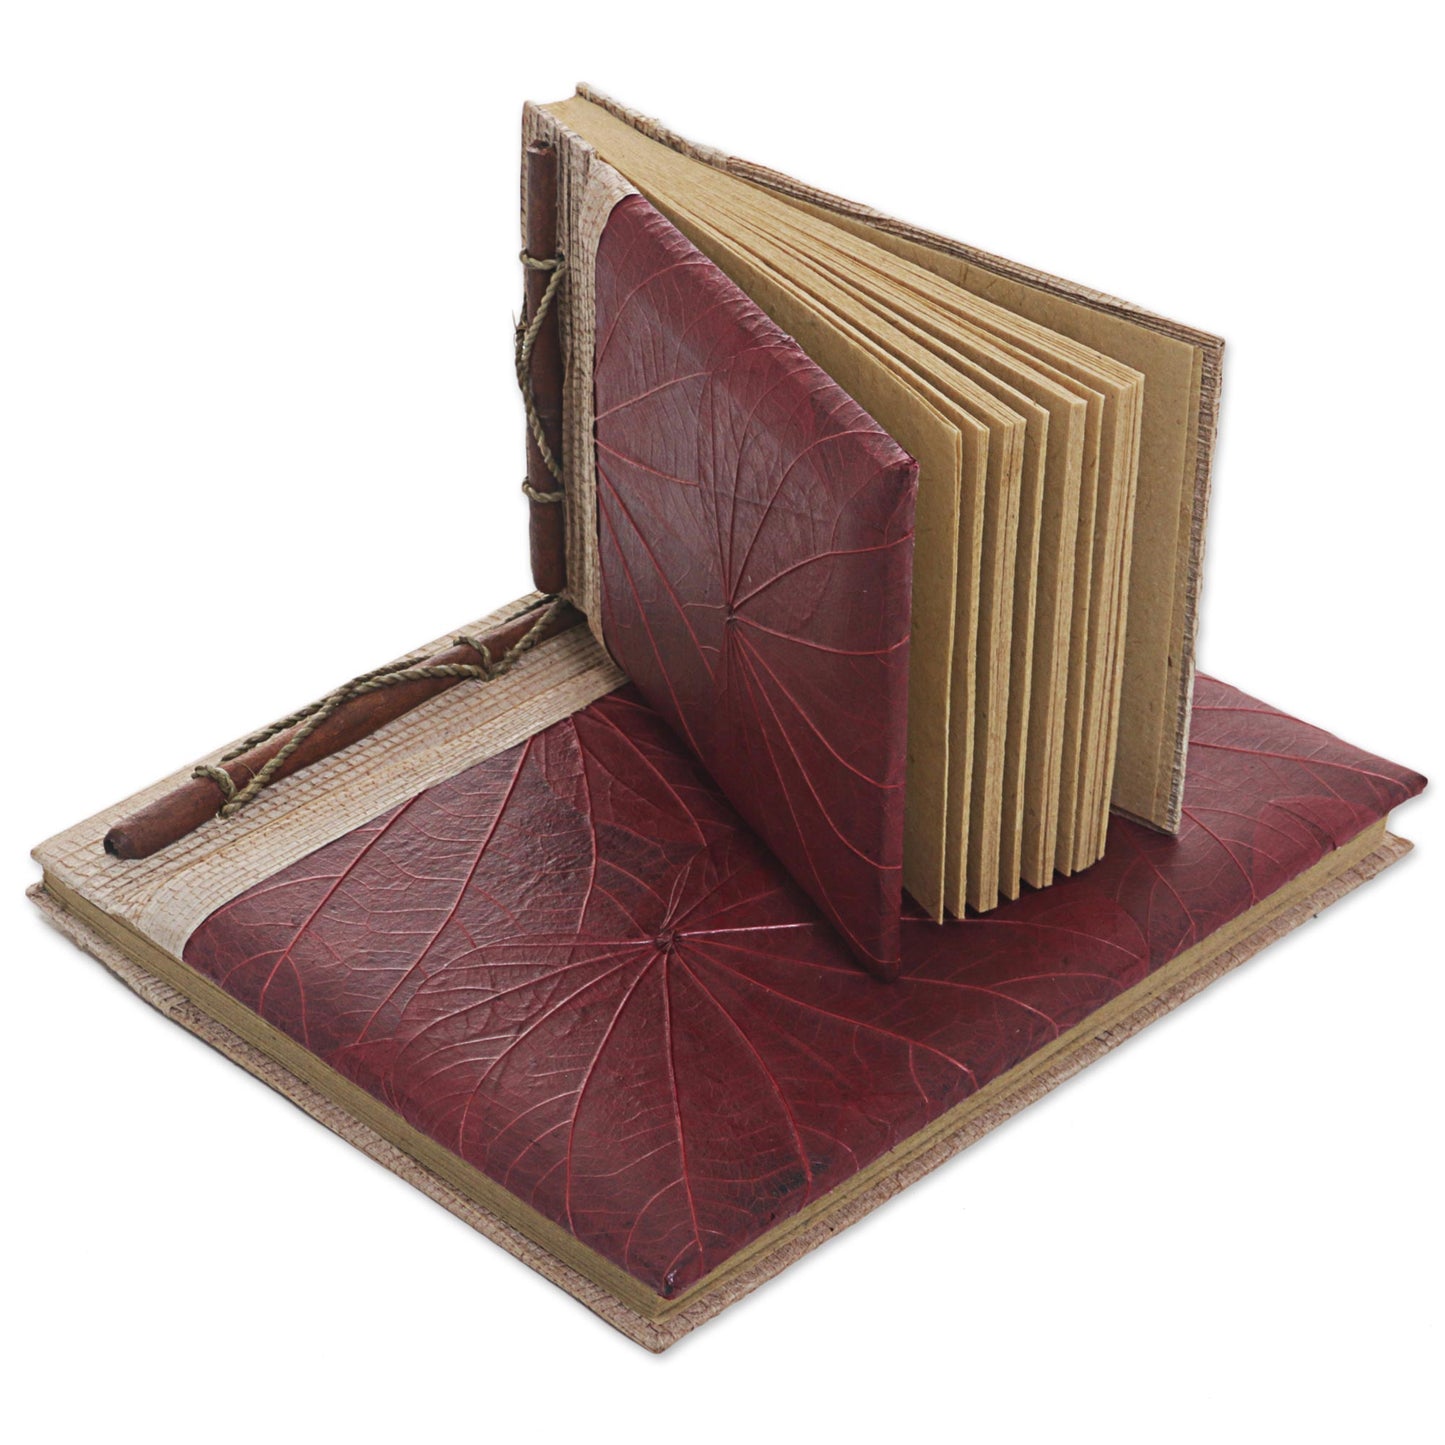 Autumn Spirit in Red Handcrafted Pair of Rice Paper Notebooks from Indonesia